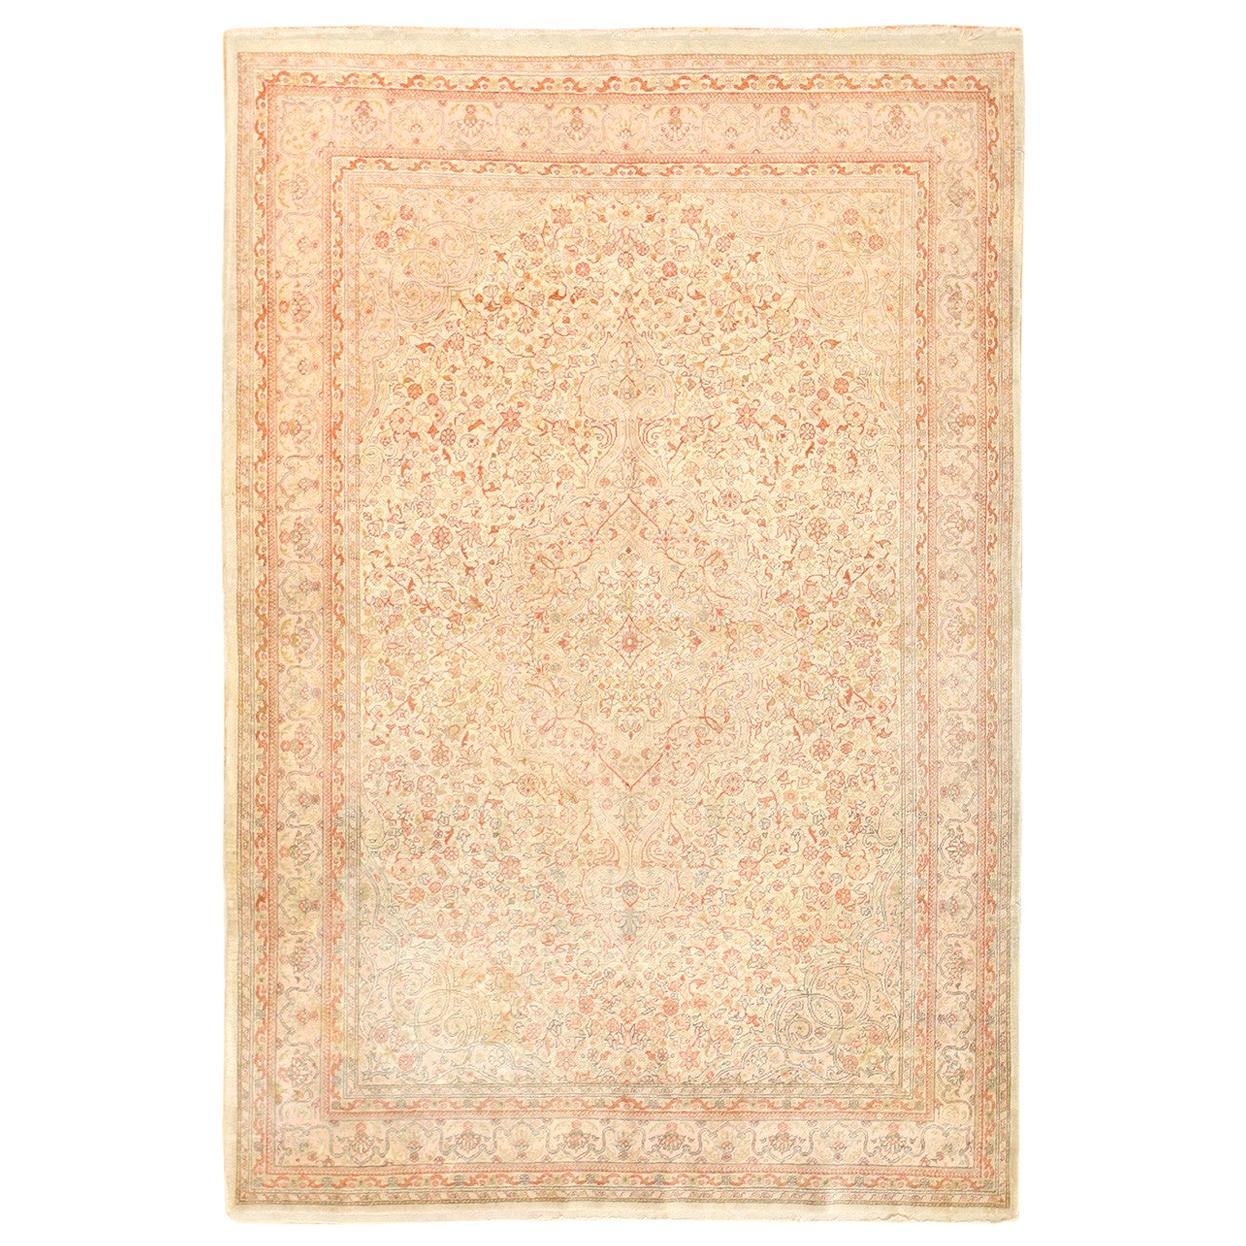 Small and Fine Antique Turkish Sivas Rug. Size: 4 ft 7 in x 6 ft 7 in